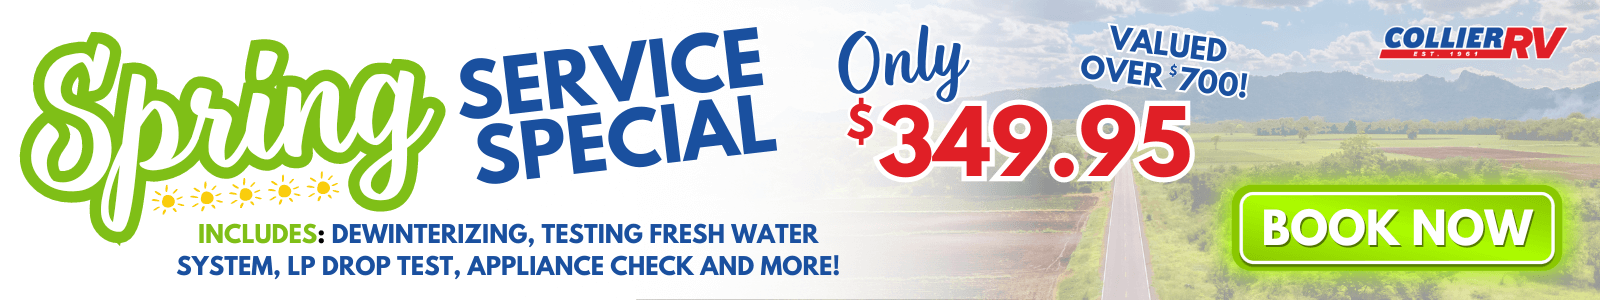 Spring Service Special Only $349.95 at Collier RV